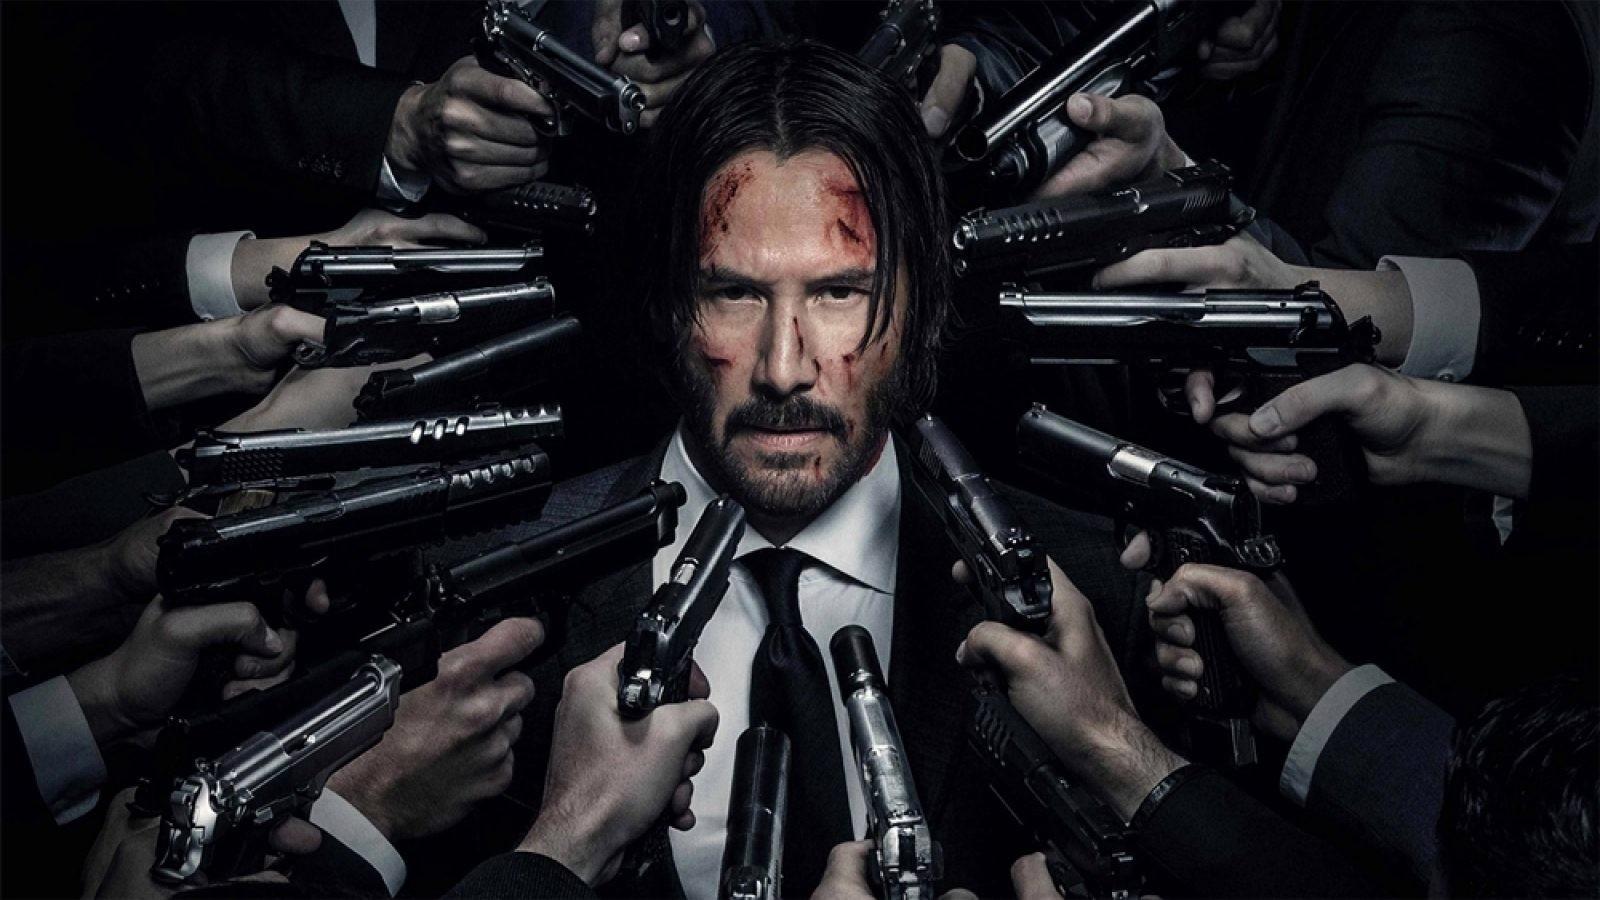 Admit that John Wick is a Garbage Franchise You Cowards